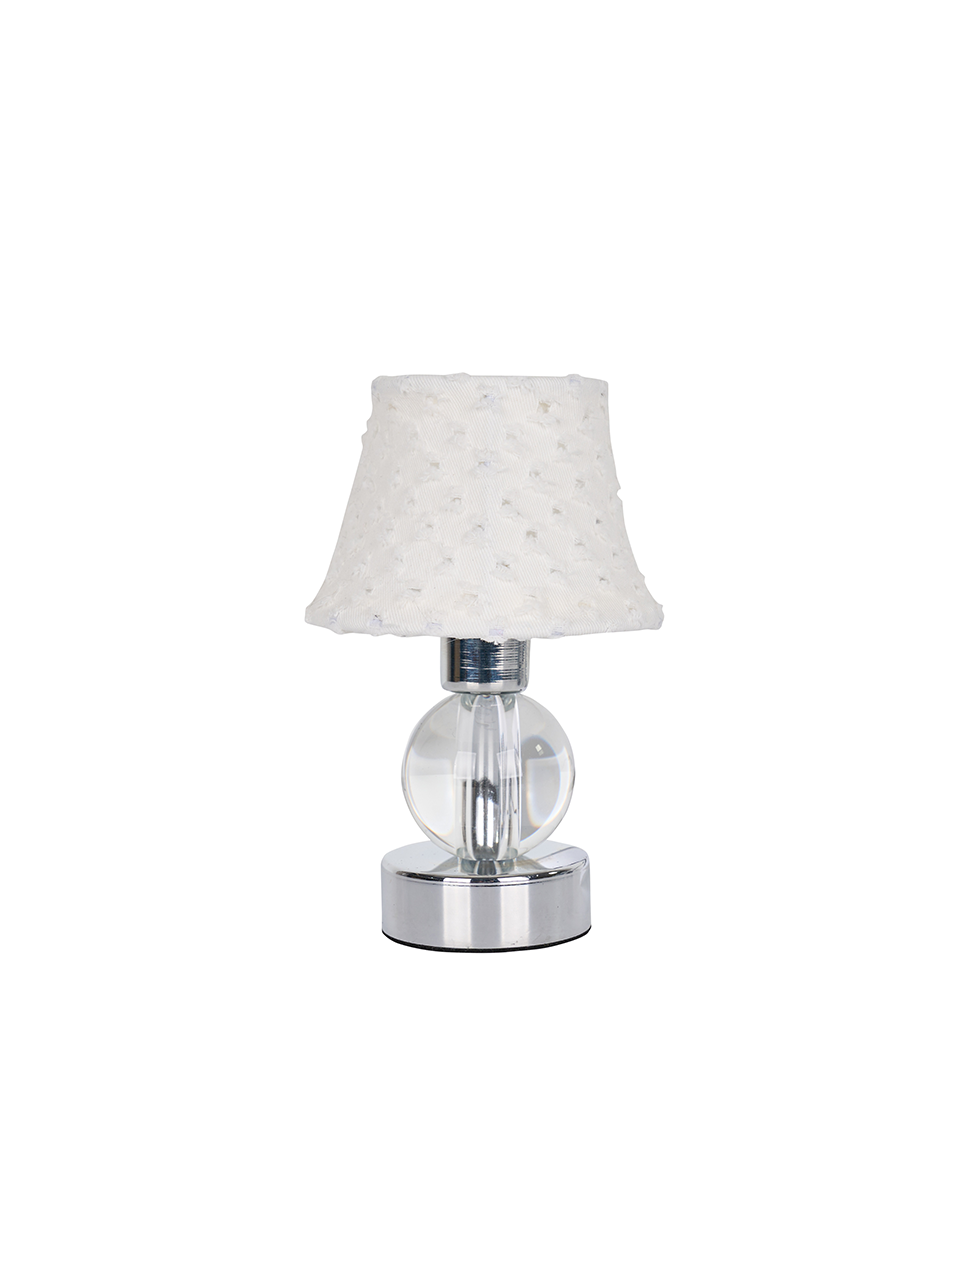 46month - PUNCH LAMP (WHITE)